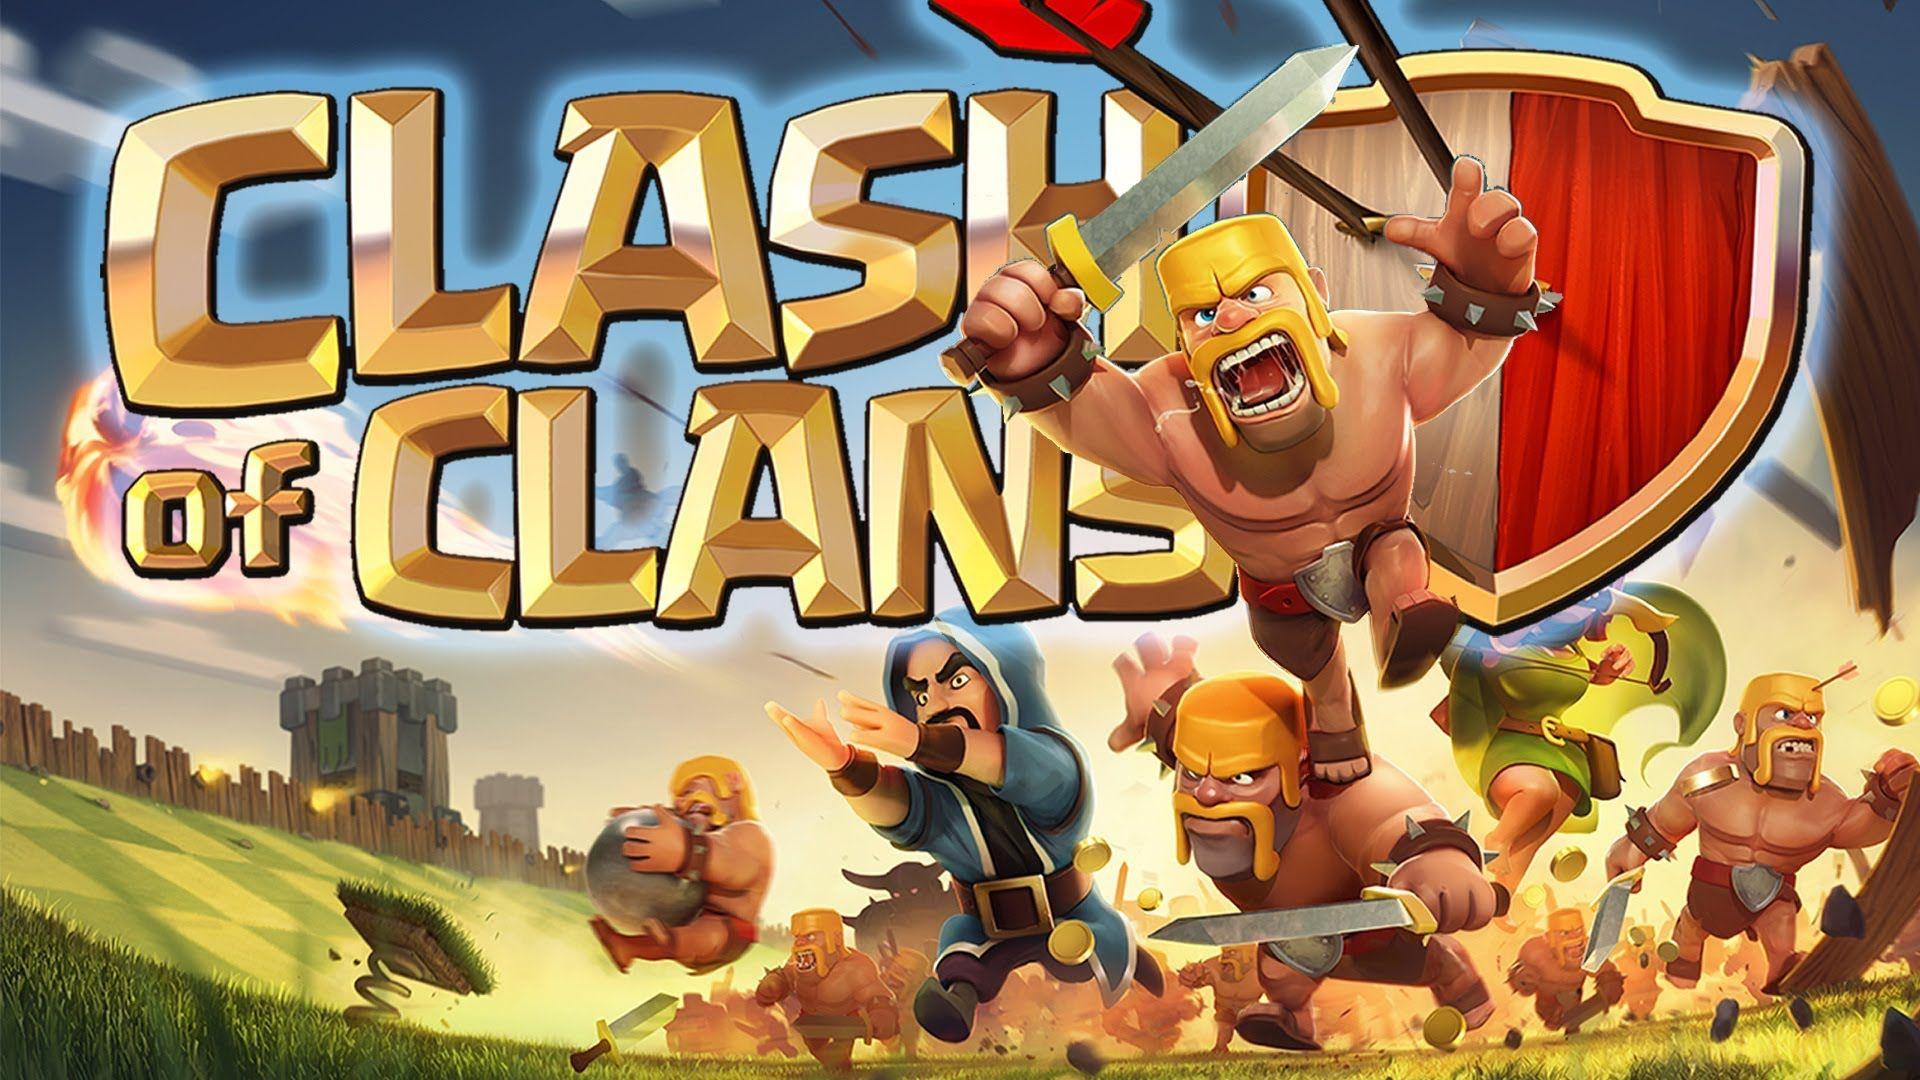 Clash of Clans Wallpaper. Best Wallpaper. Android